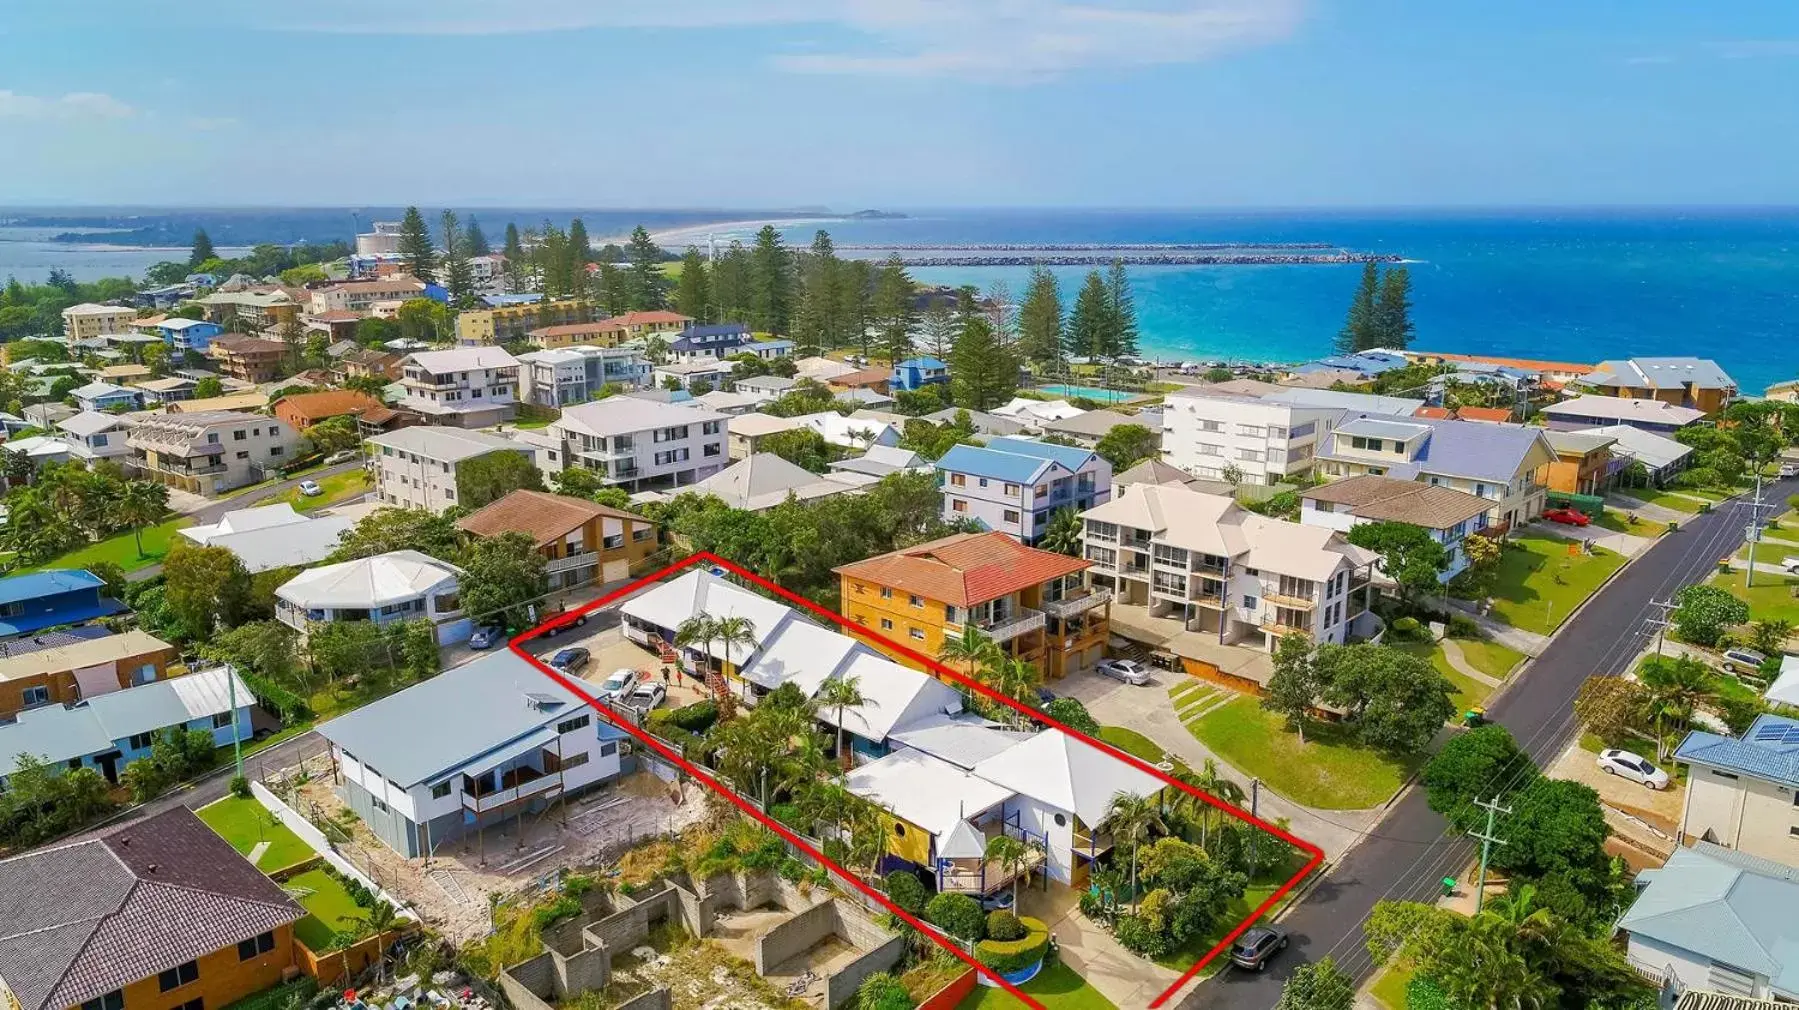 On site, Bird's-eye View in Coast Yamba - Adults Only